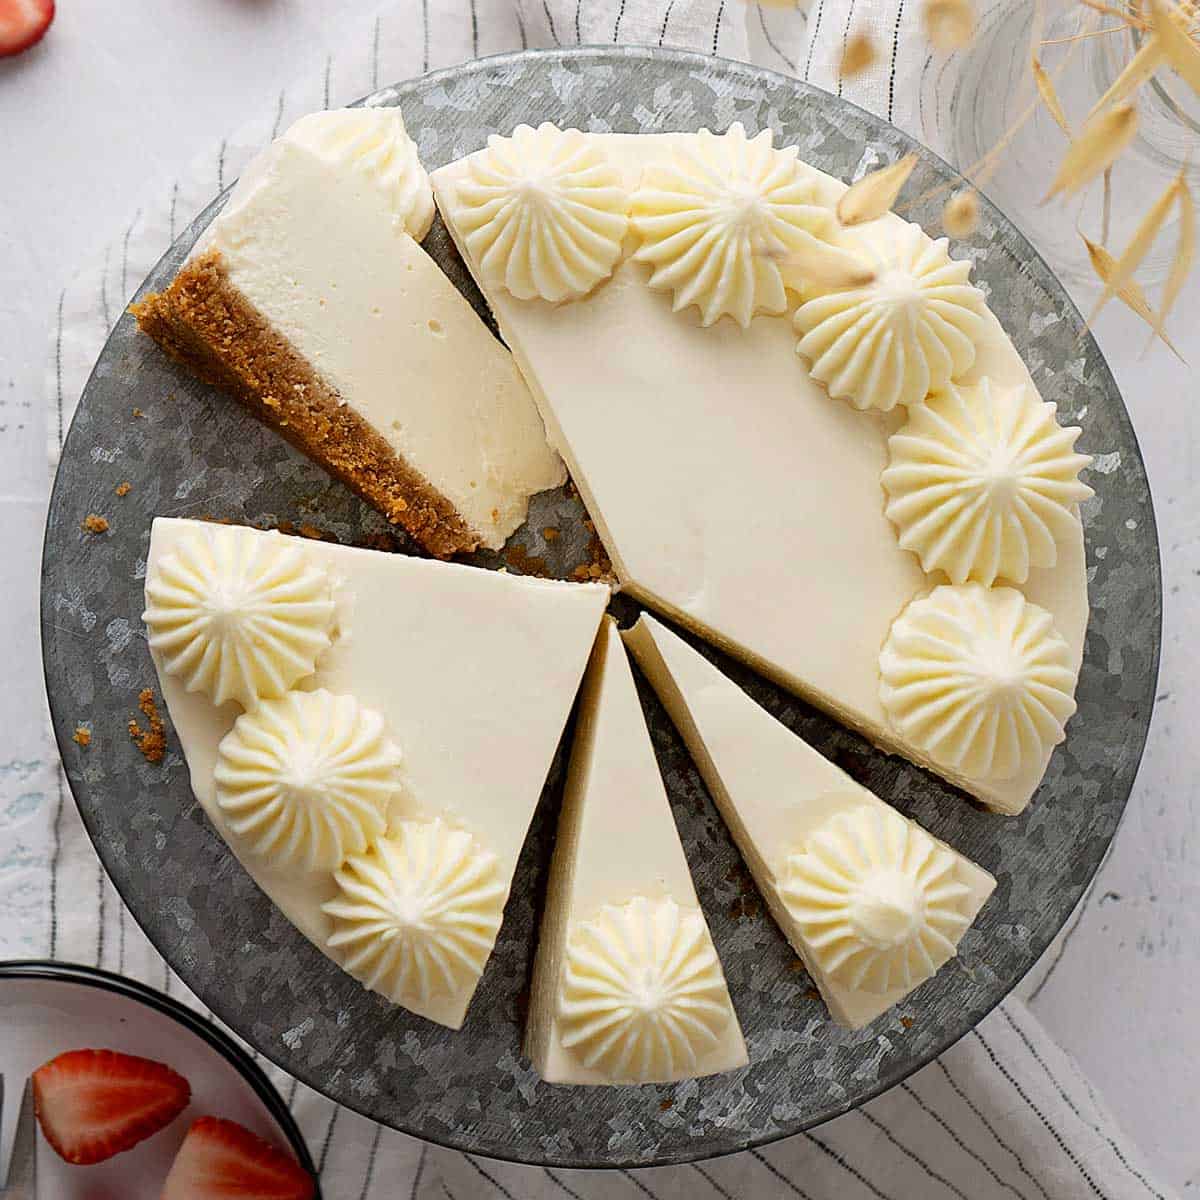 How to make a delicious cheesecake without hours of work or a springform pan,  revealed